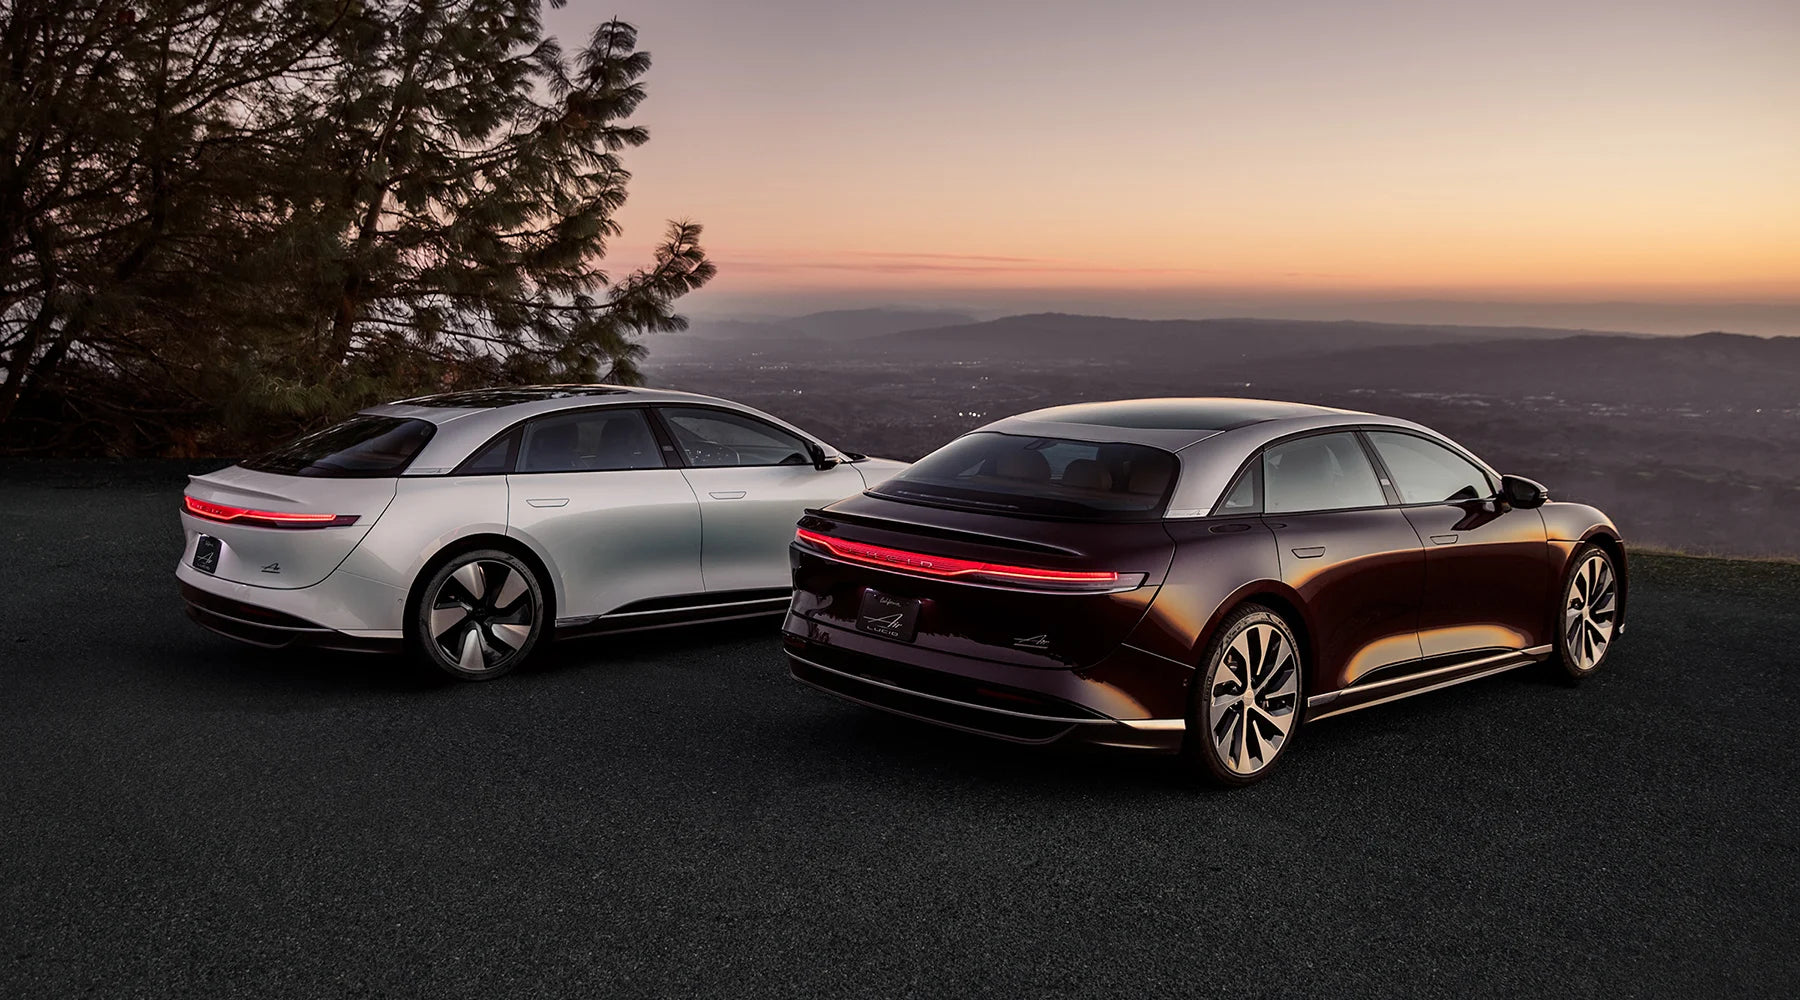 Lucid Air Grand Touring Delivers The Longest Range Of Any EV